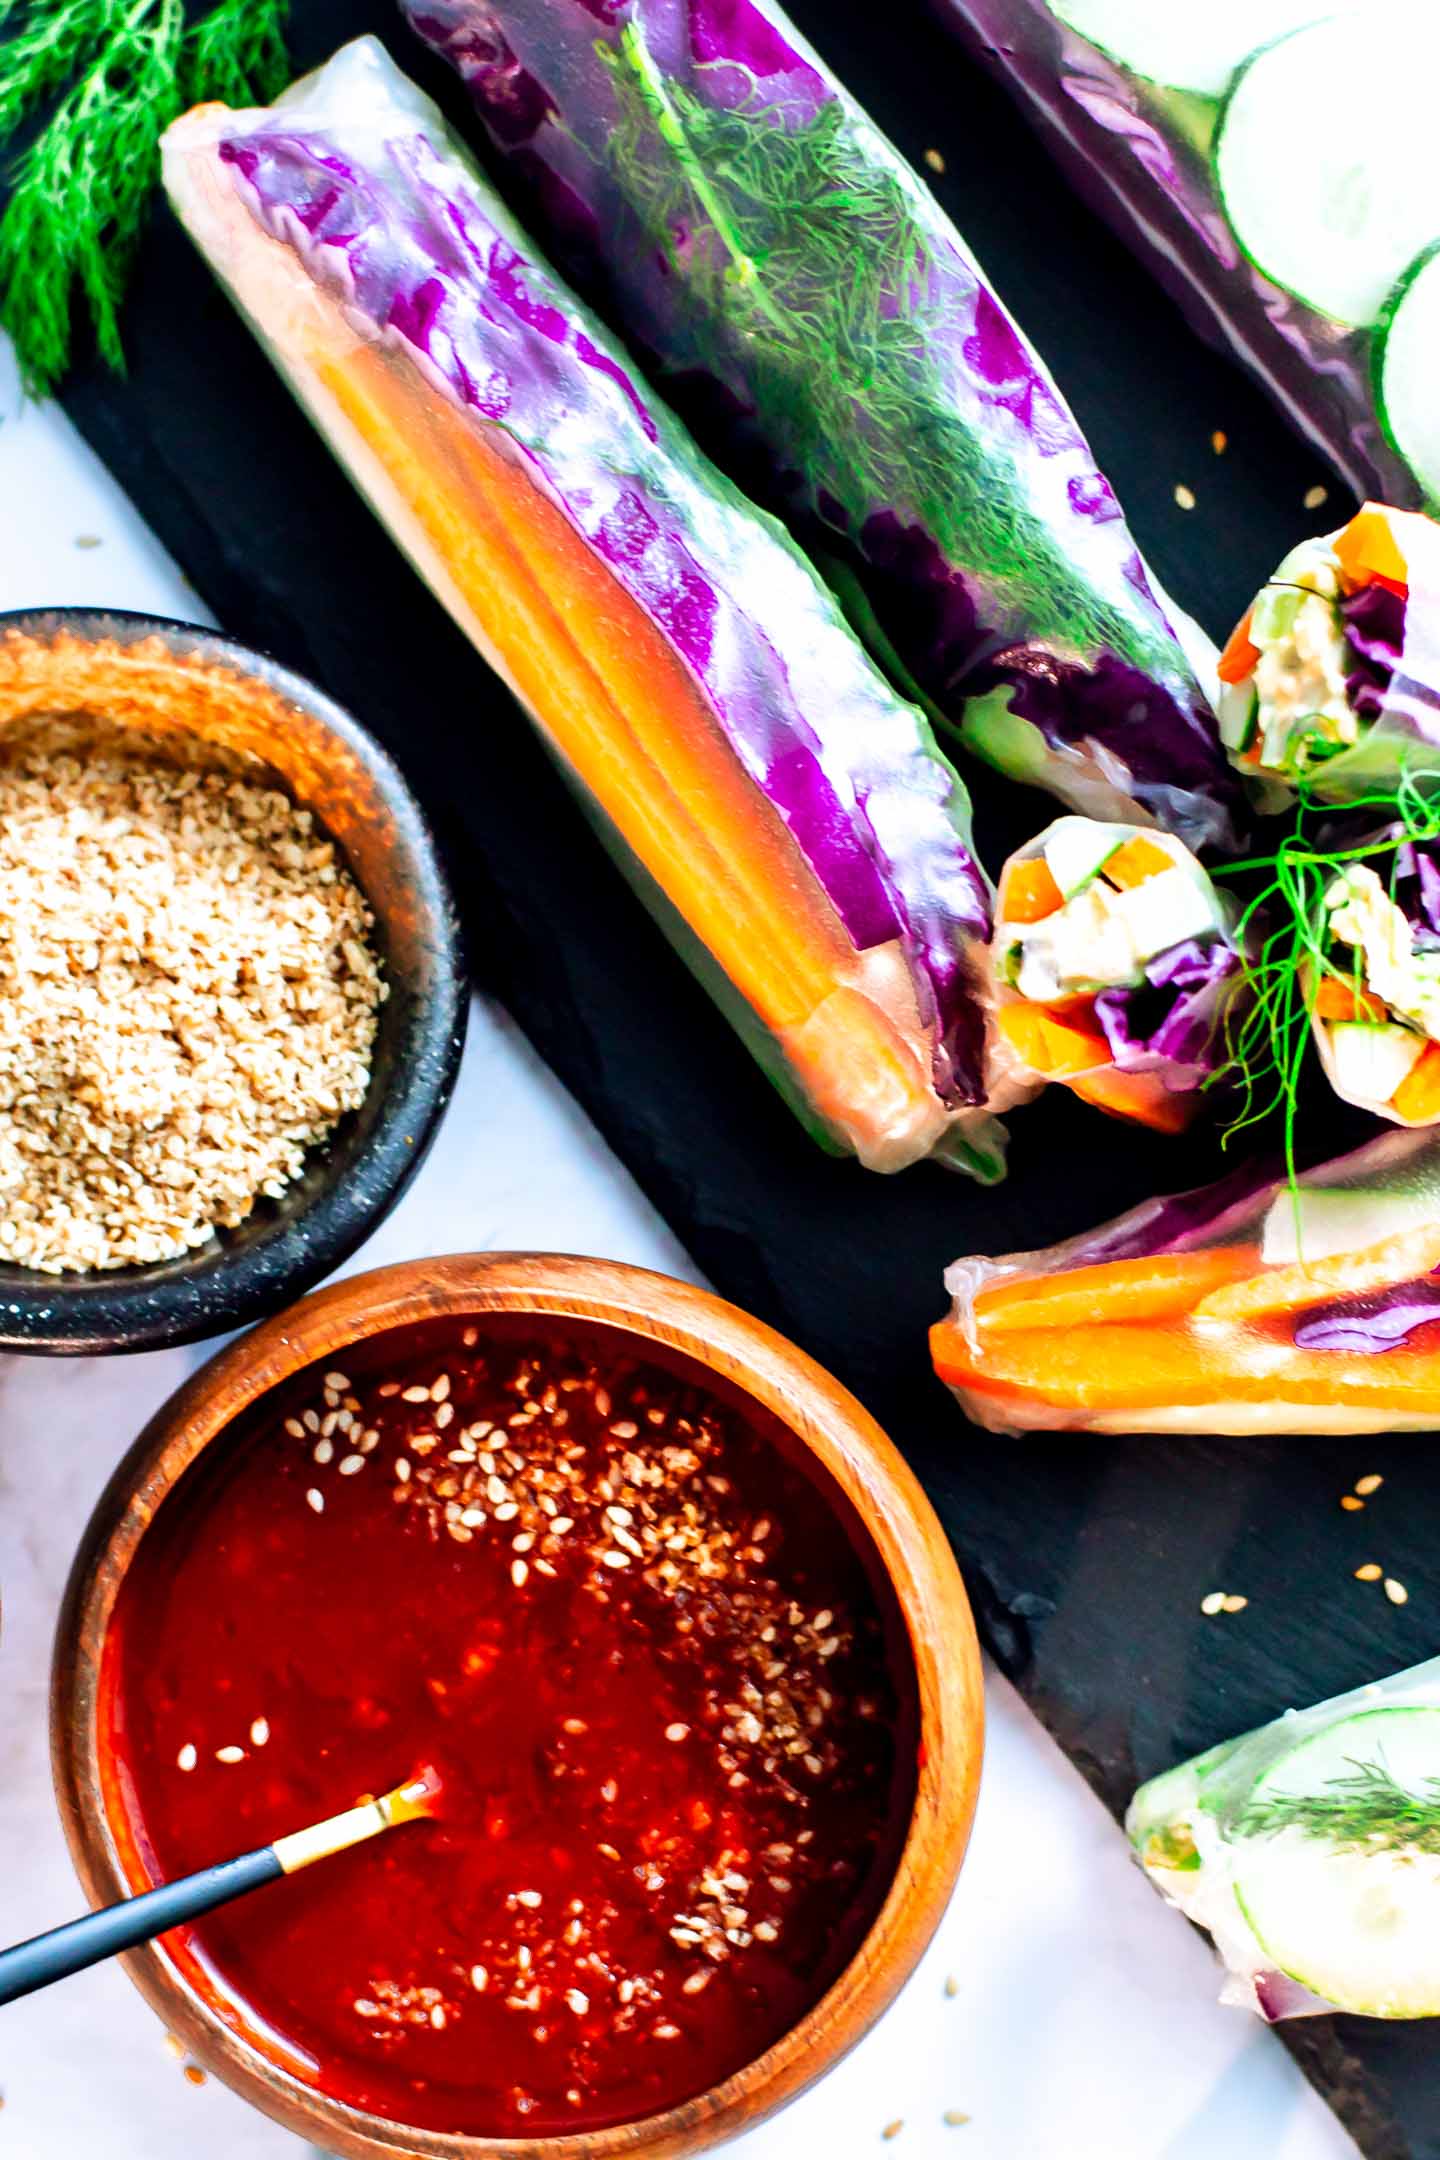 Spicy Miso Sauce With Gochujang (Plant-Based Recipe)